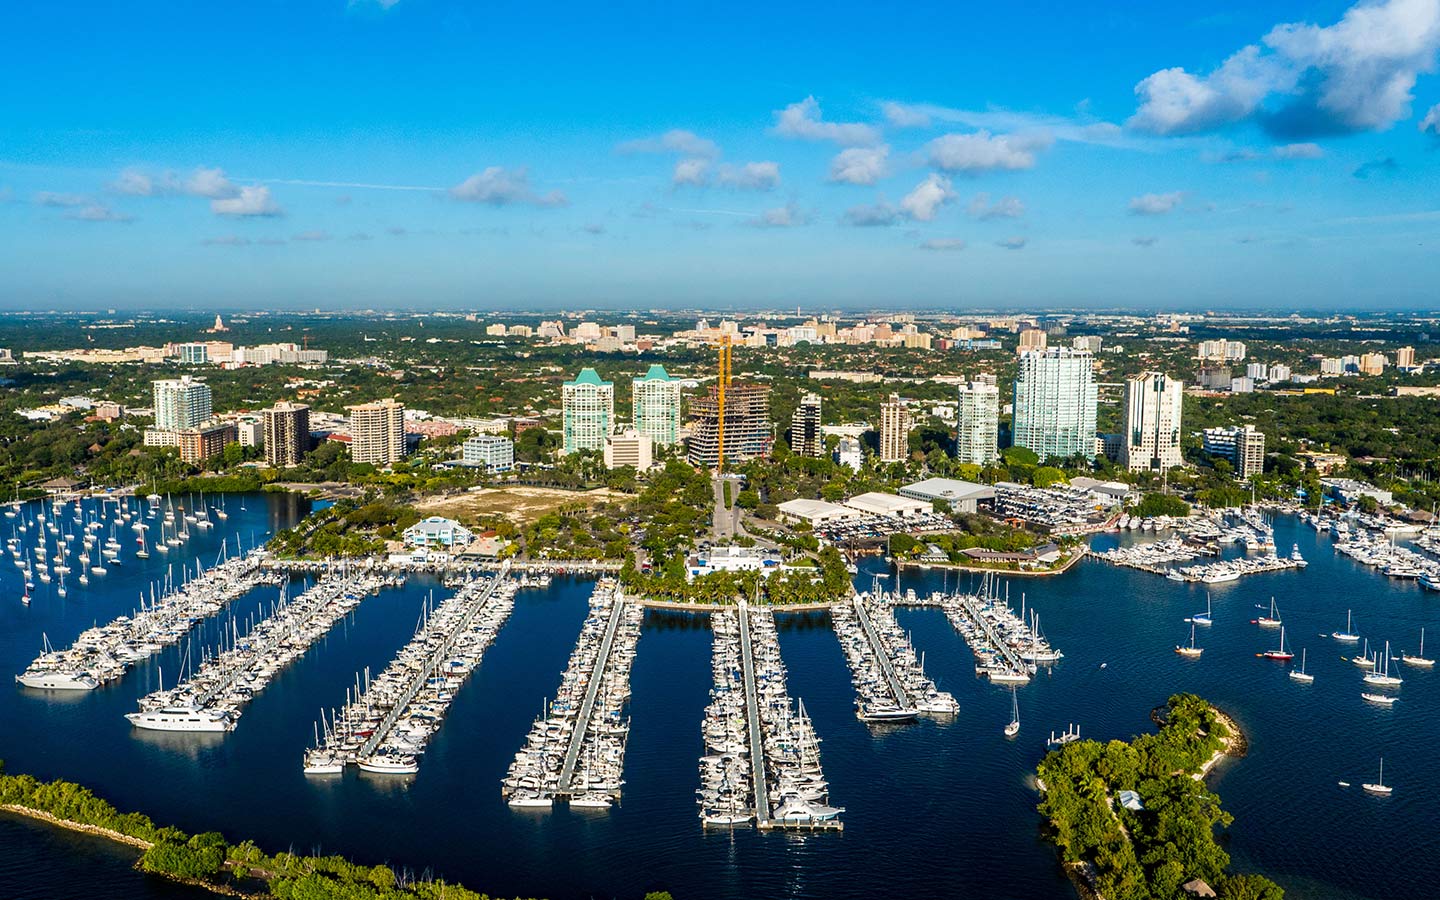 Aerial view of Coconut Grove and the marina